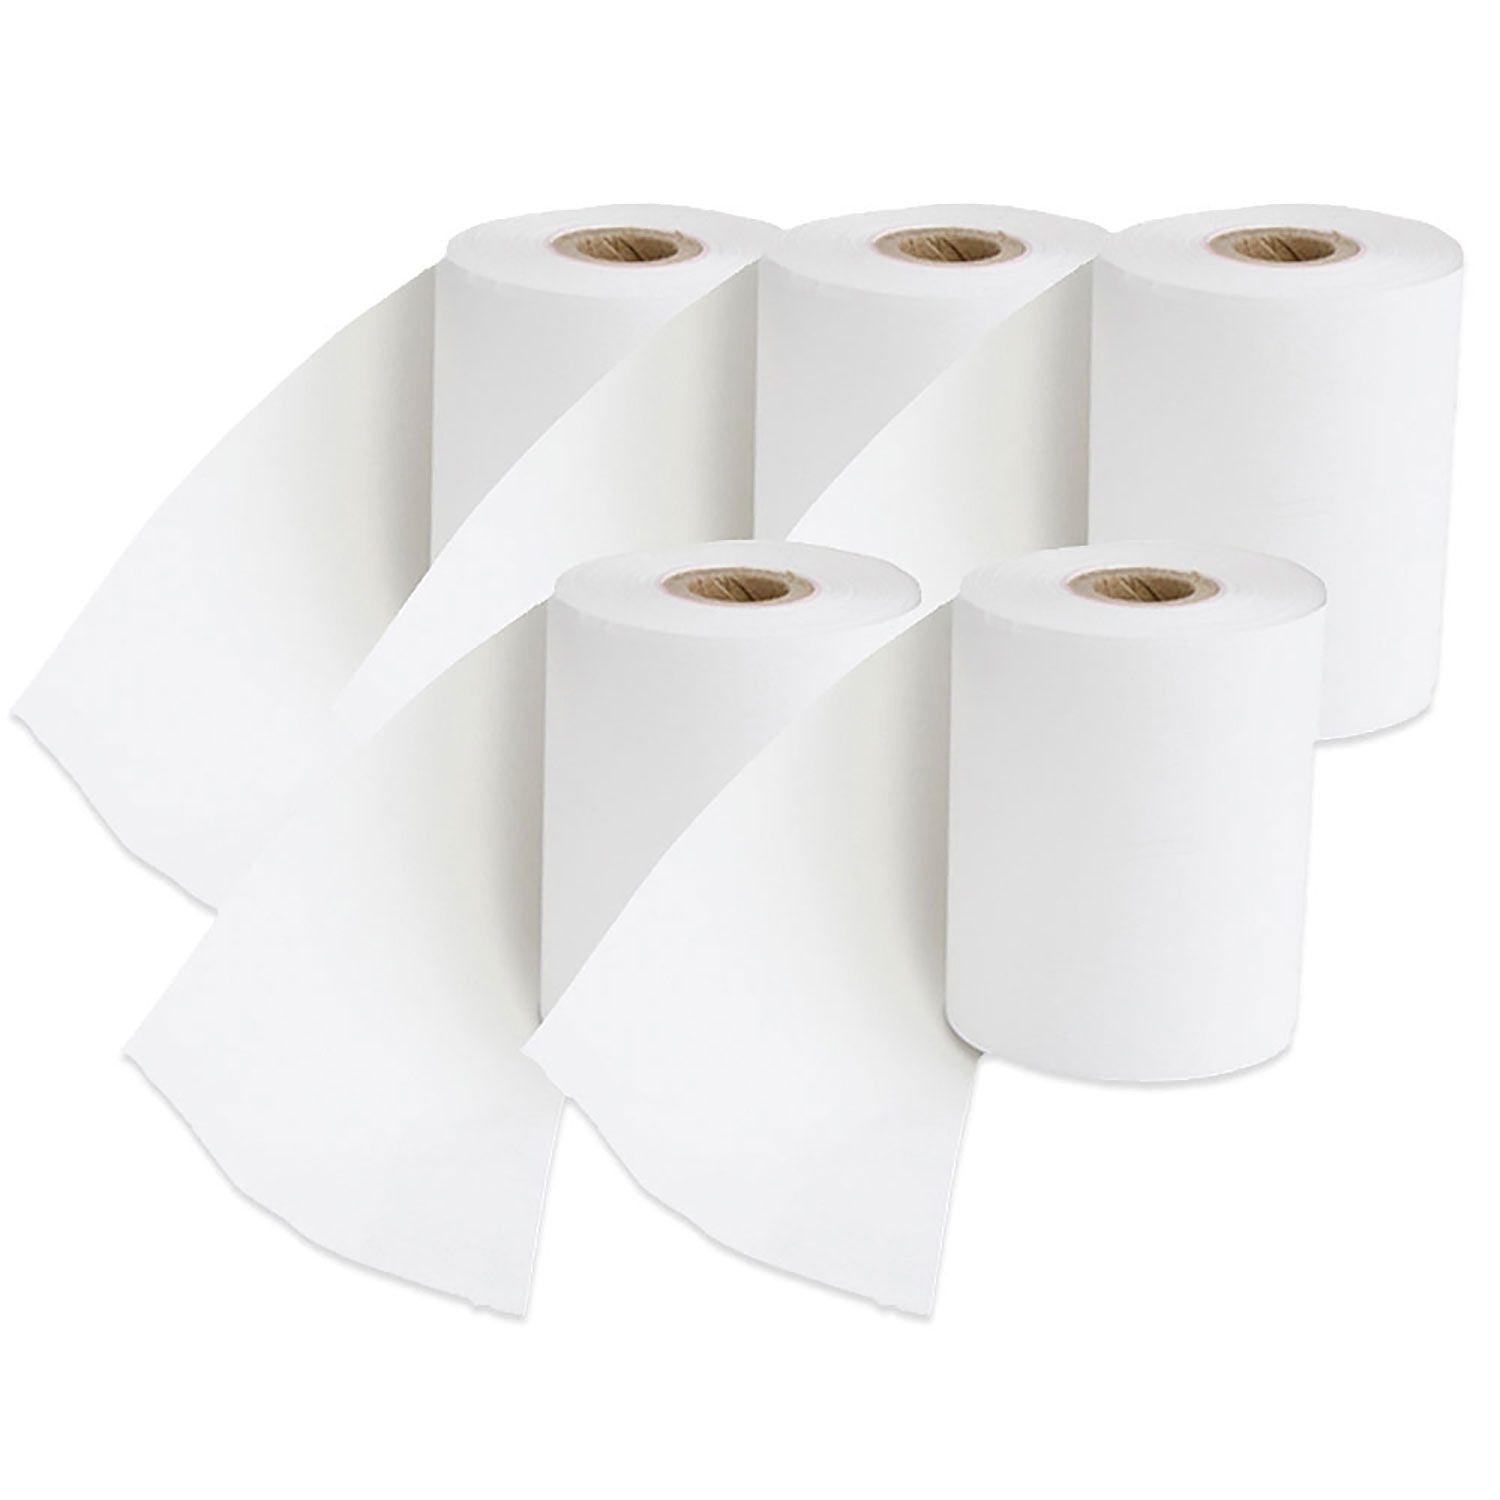 Suresign Analyser Paper Rolls | Pack of 4